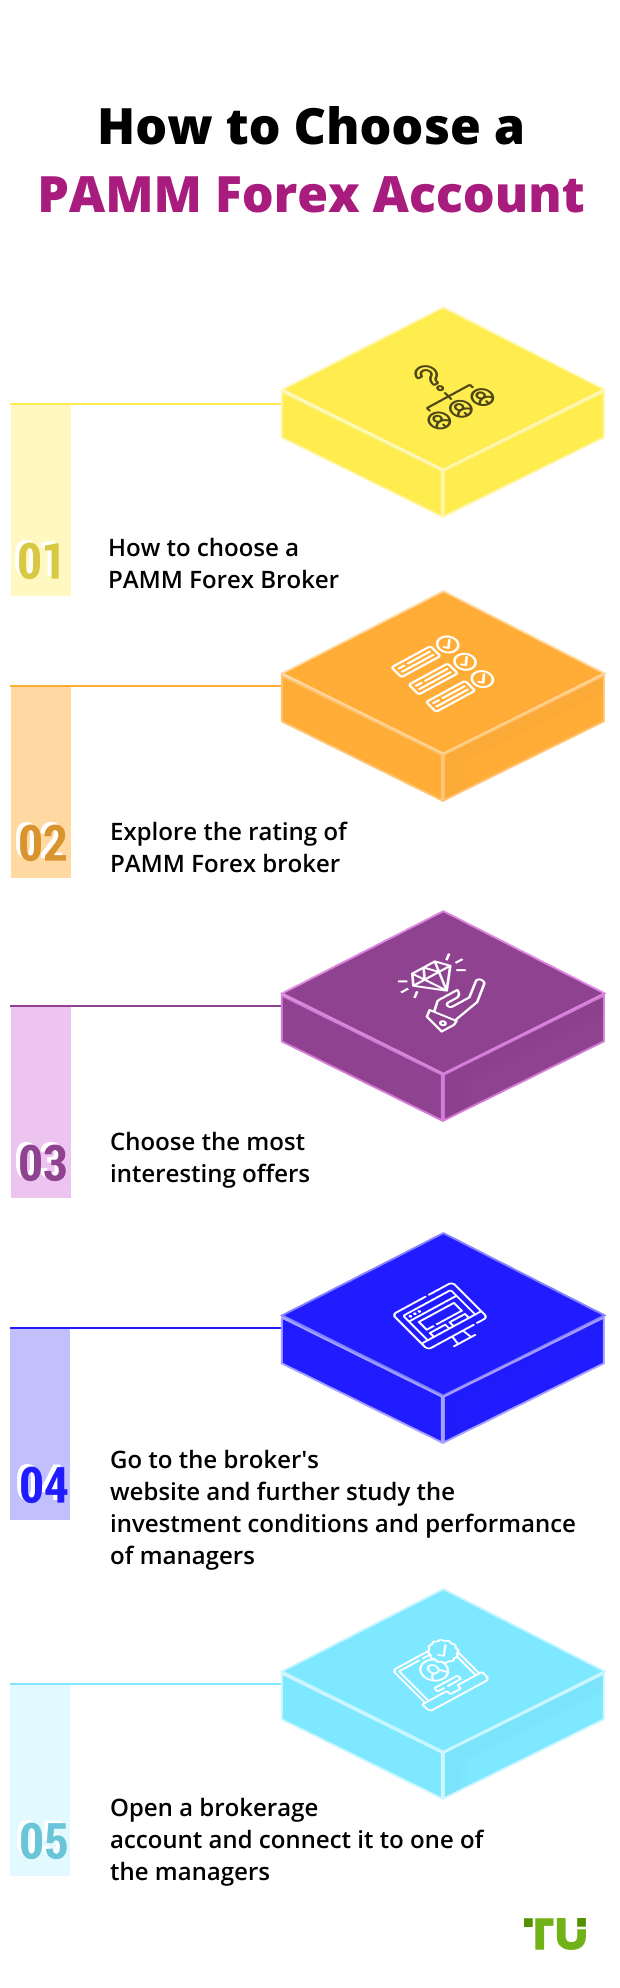 How to Сhoose a PAMM Forex Account